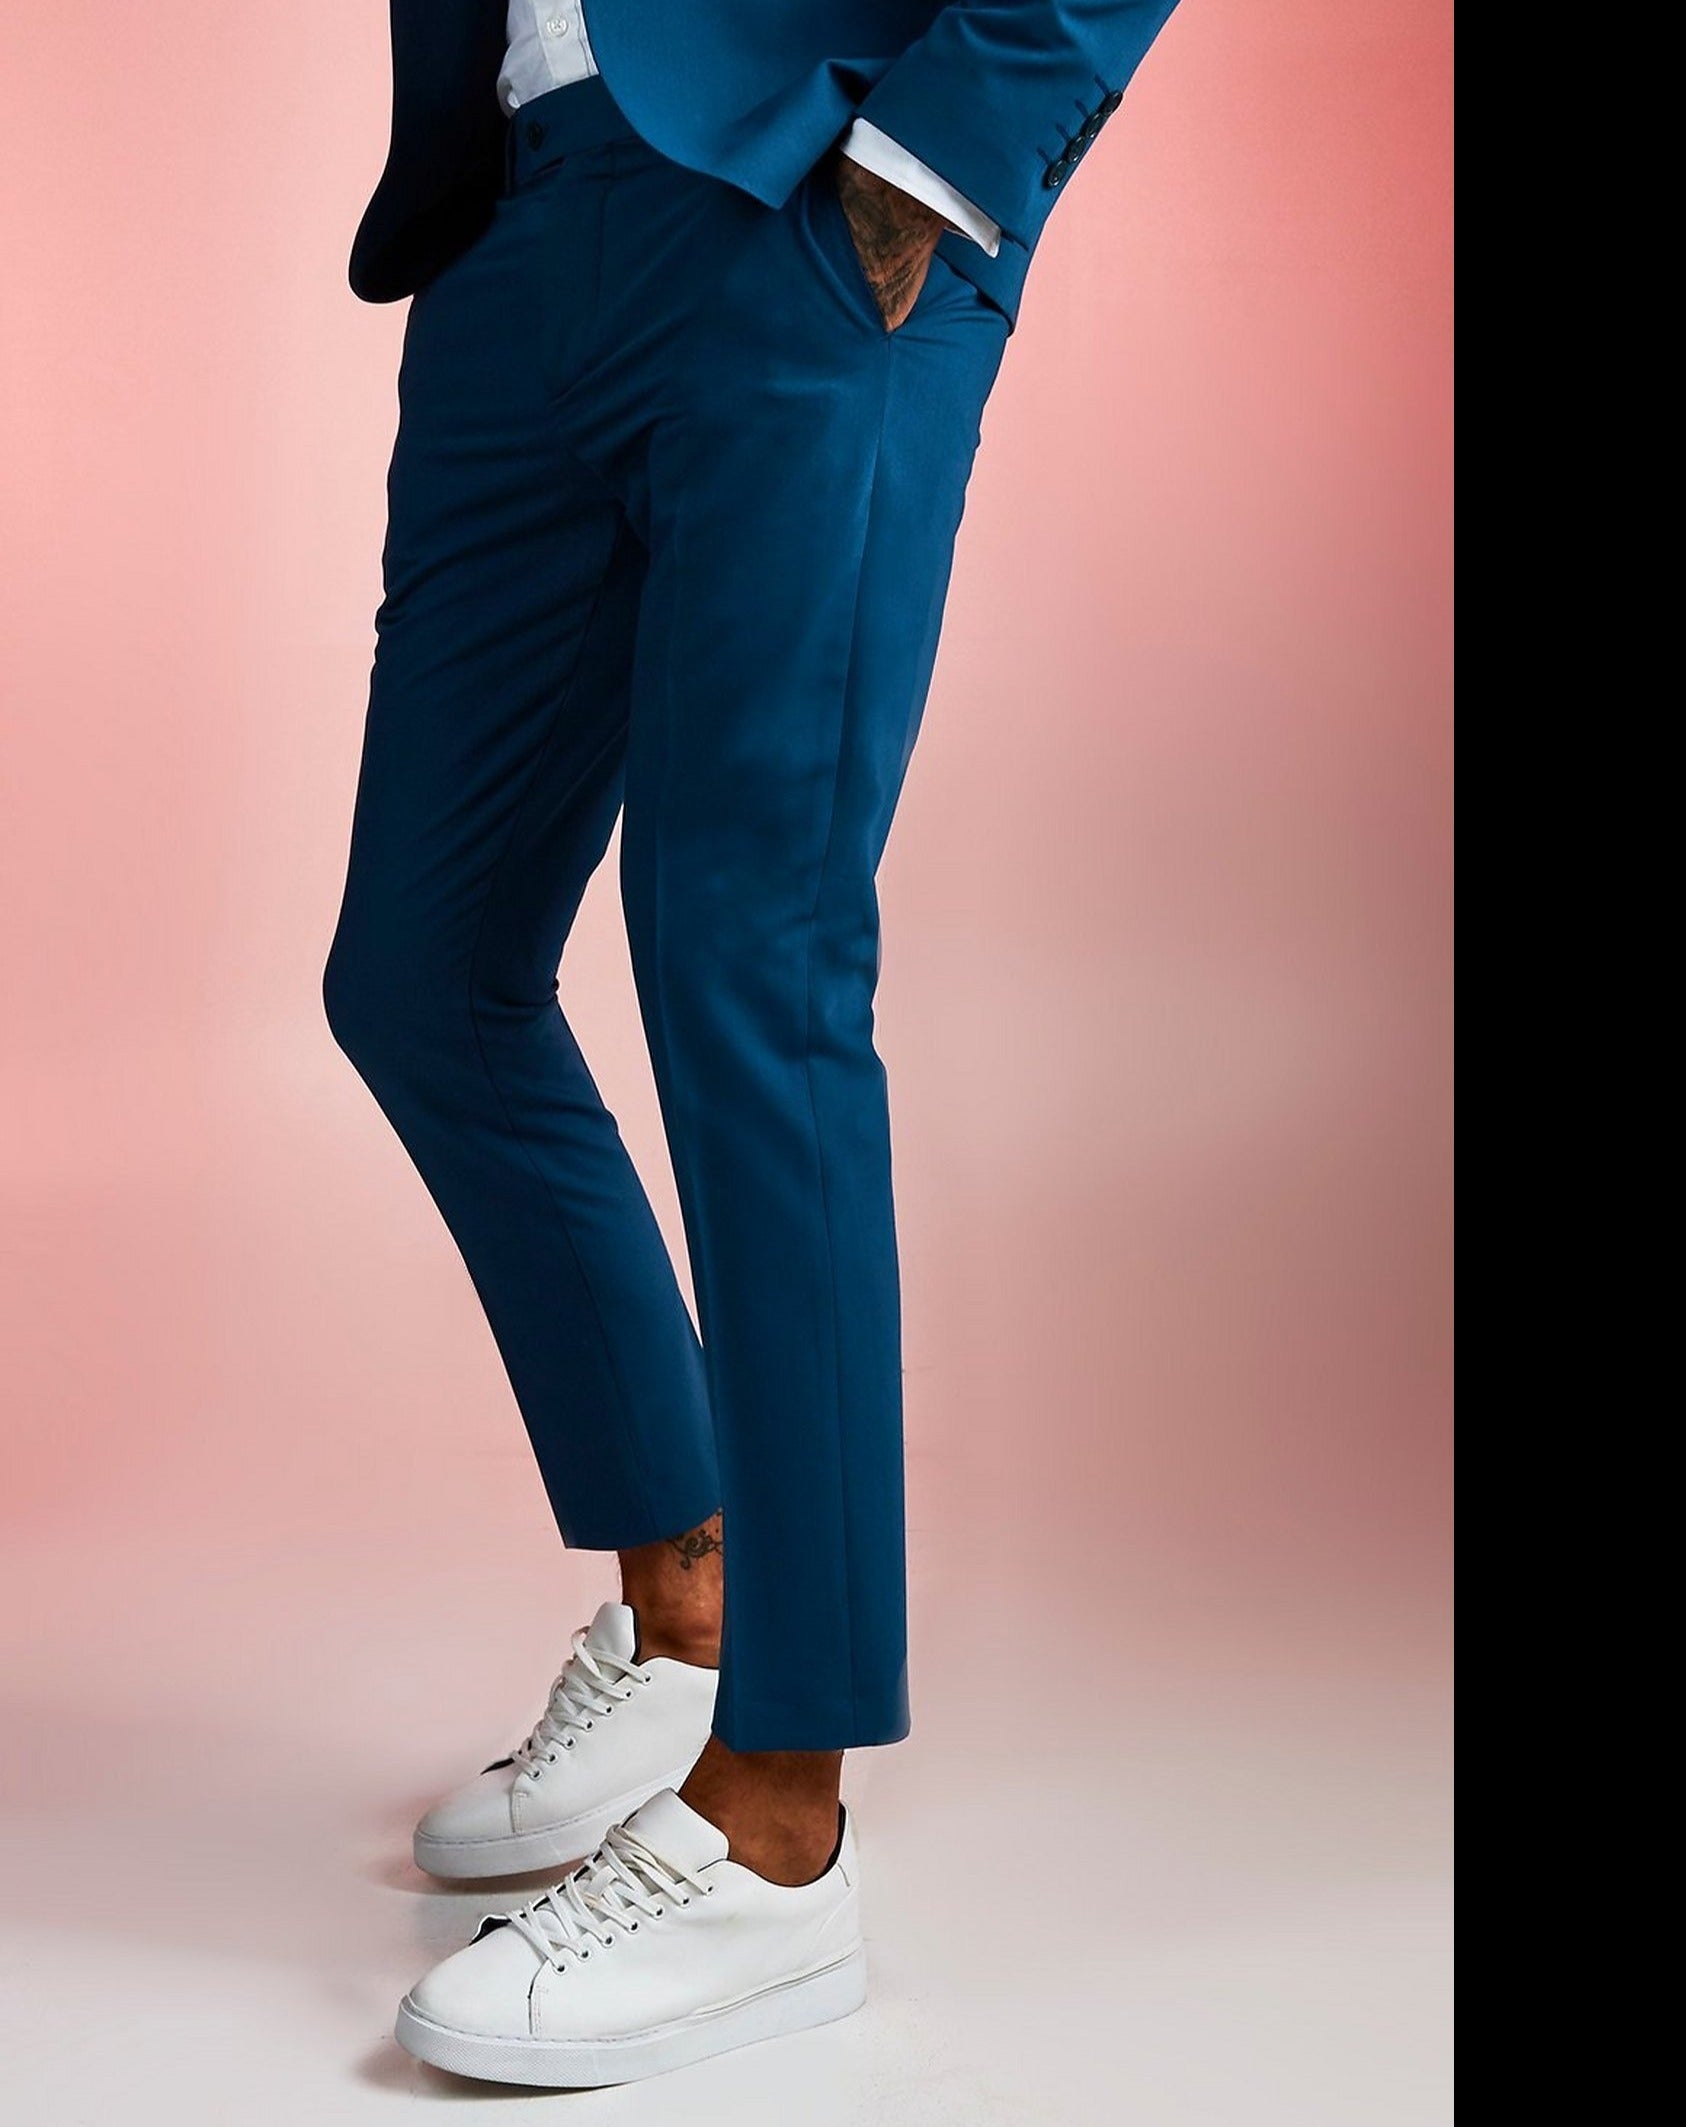 Mens Slim Fit Ankle Length Business Office Pants Men In Solid Colors For  Spring Weddings, Office, And Formal Events Style 210527 From Dou04, $27.08  | DHgate.Com